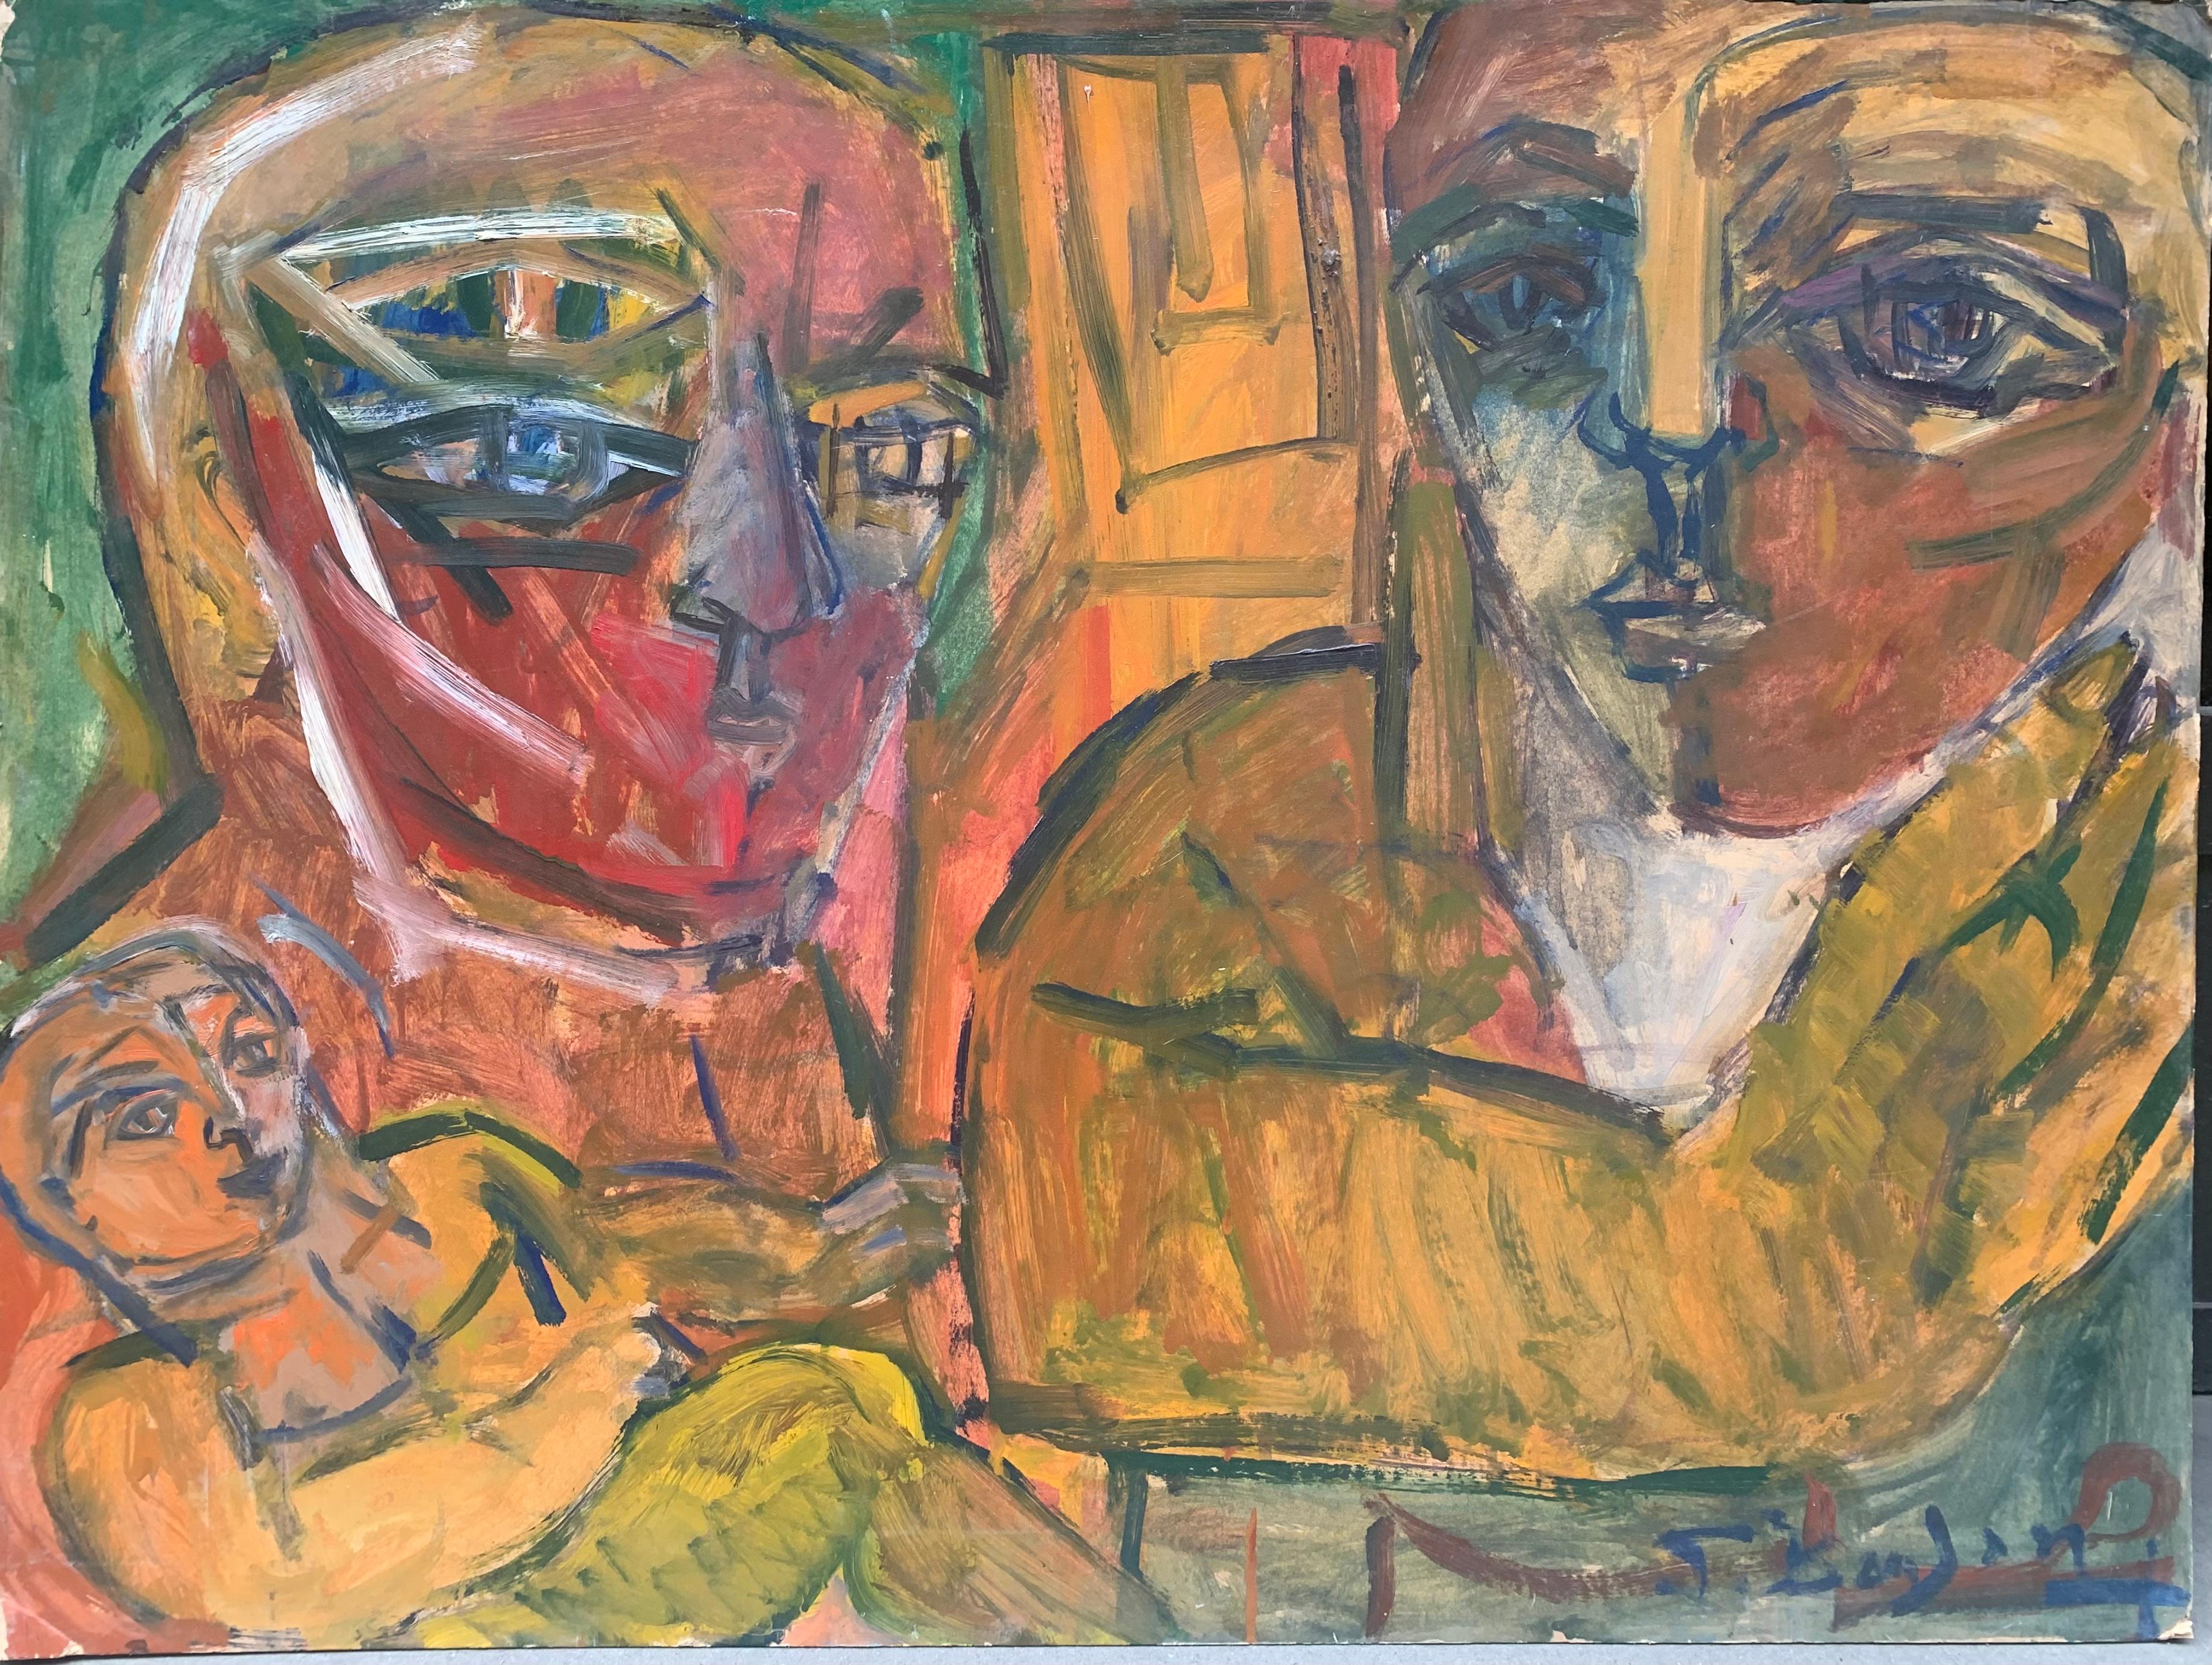 Patrick Boudon.
Inner Family.

Post-war Expressionism.
1970s.
Patrick Boudon.
Art Informel. Ecole de Paris.
Technique: oil on cardboard.

This painting by Patrick Boudon from the 1970s, entitled "Inner Family," depicts a family with a man, a woman,